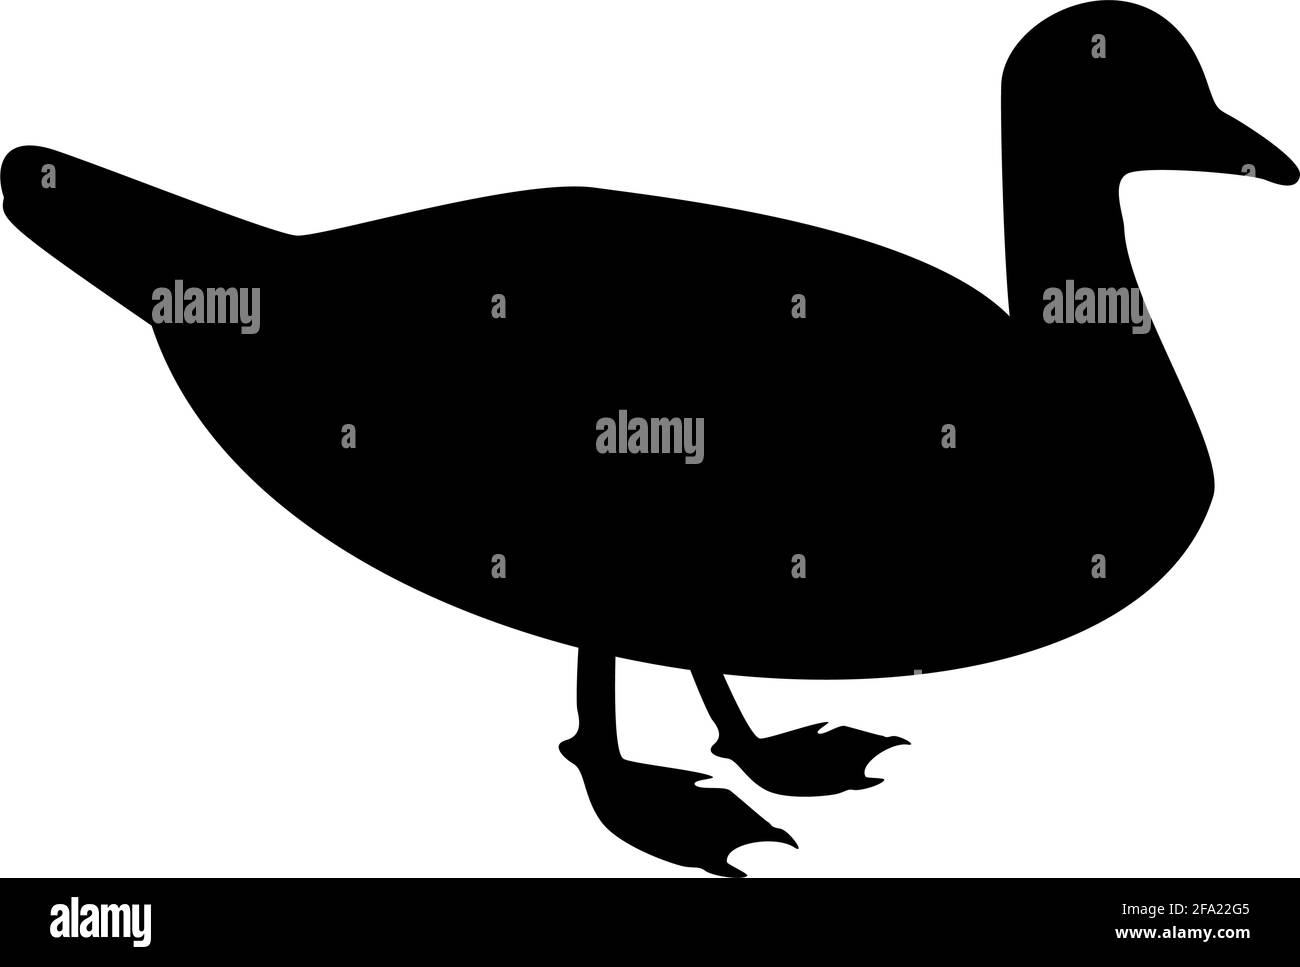 Silhouette duck male mallard bird waterbird waterfowl poultry fowl canard black color vector illustration flat style simple image Stock Vector